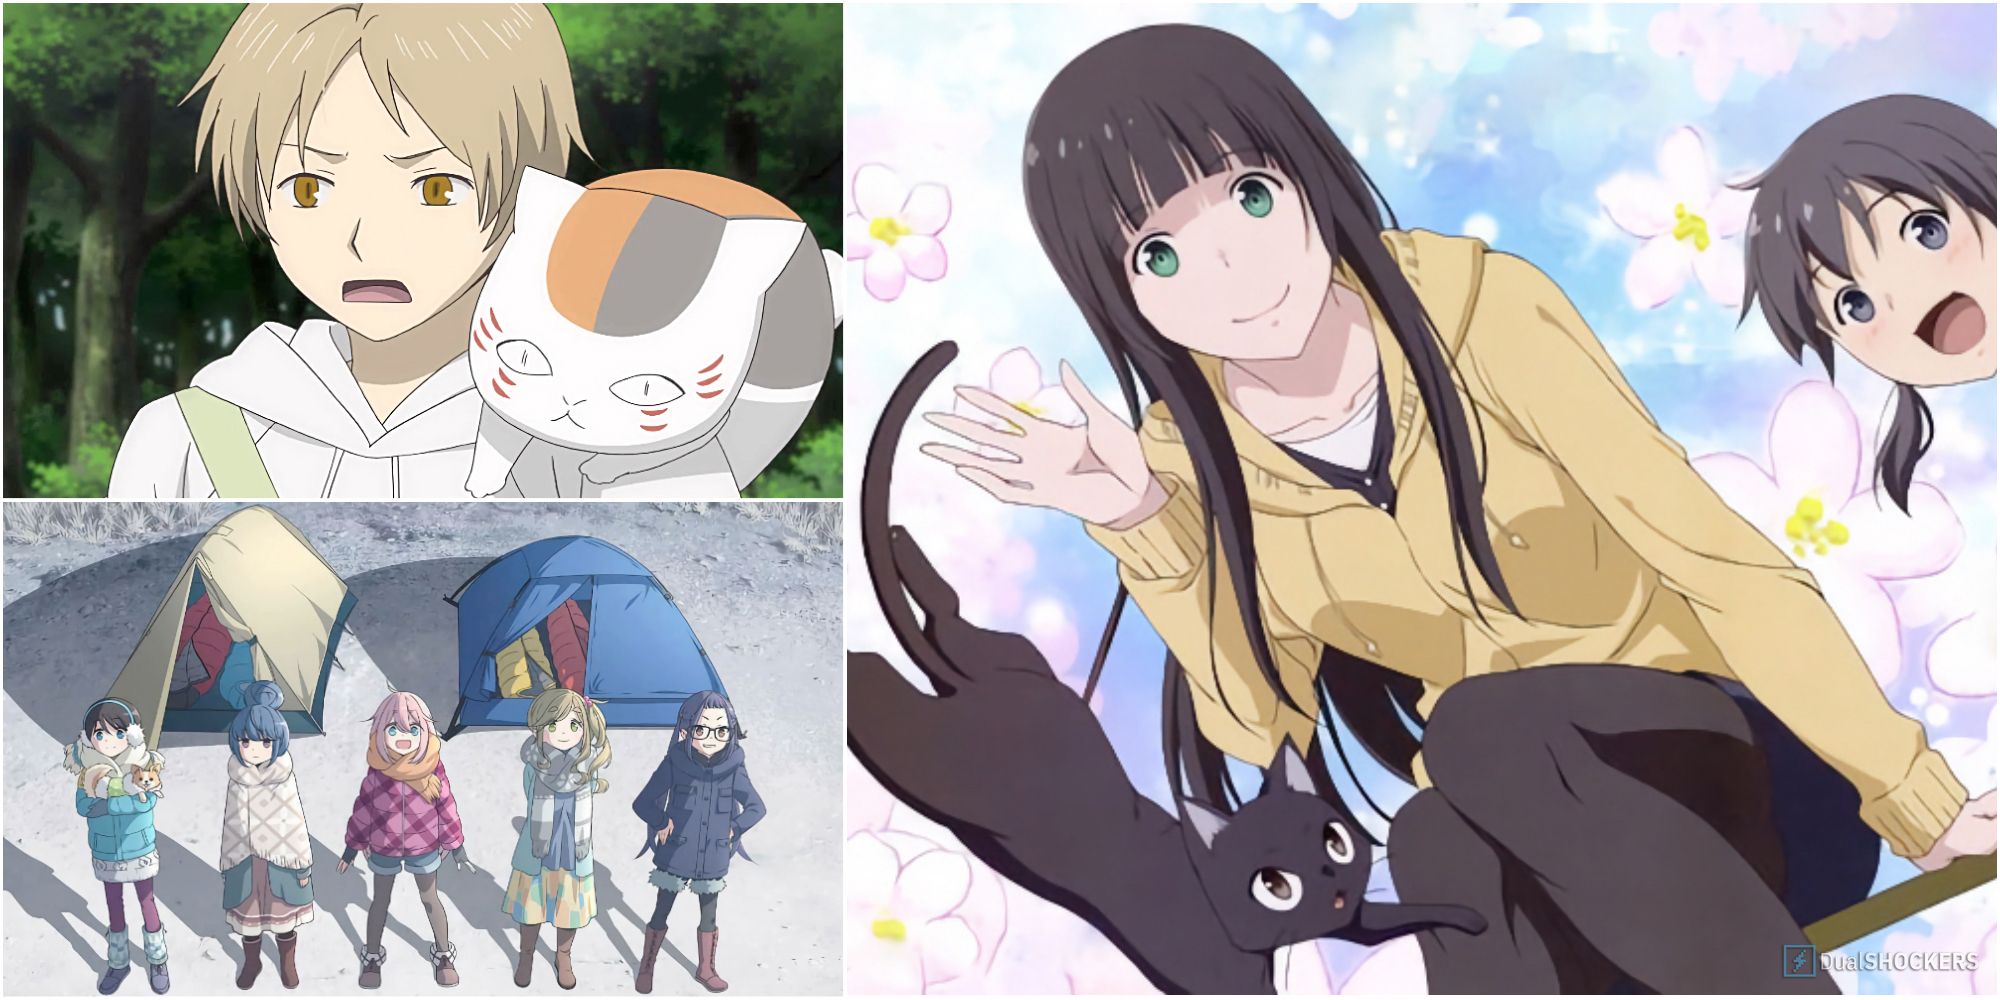 Flying Witch Is the Most Underrated Slice-of-Life Anime